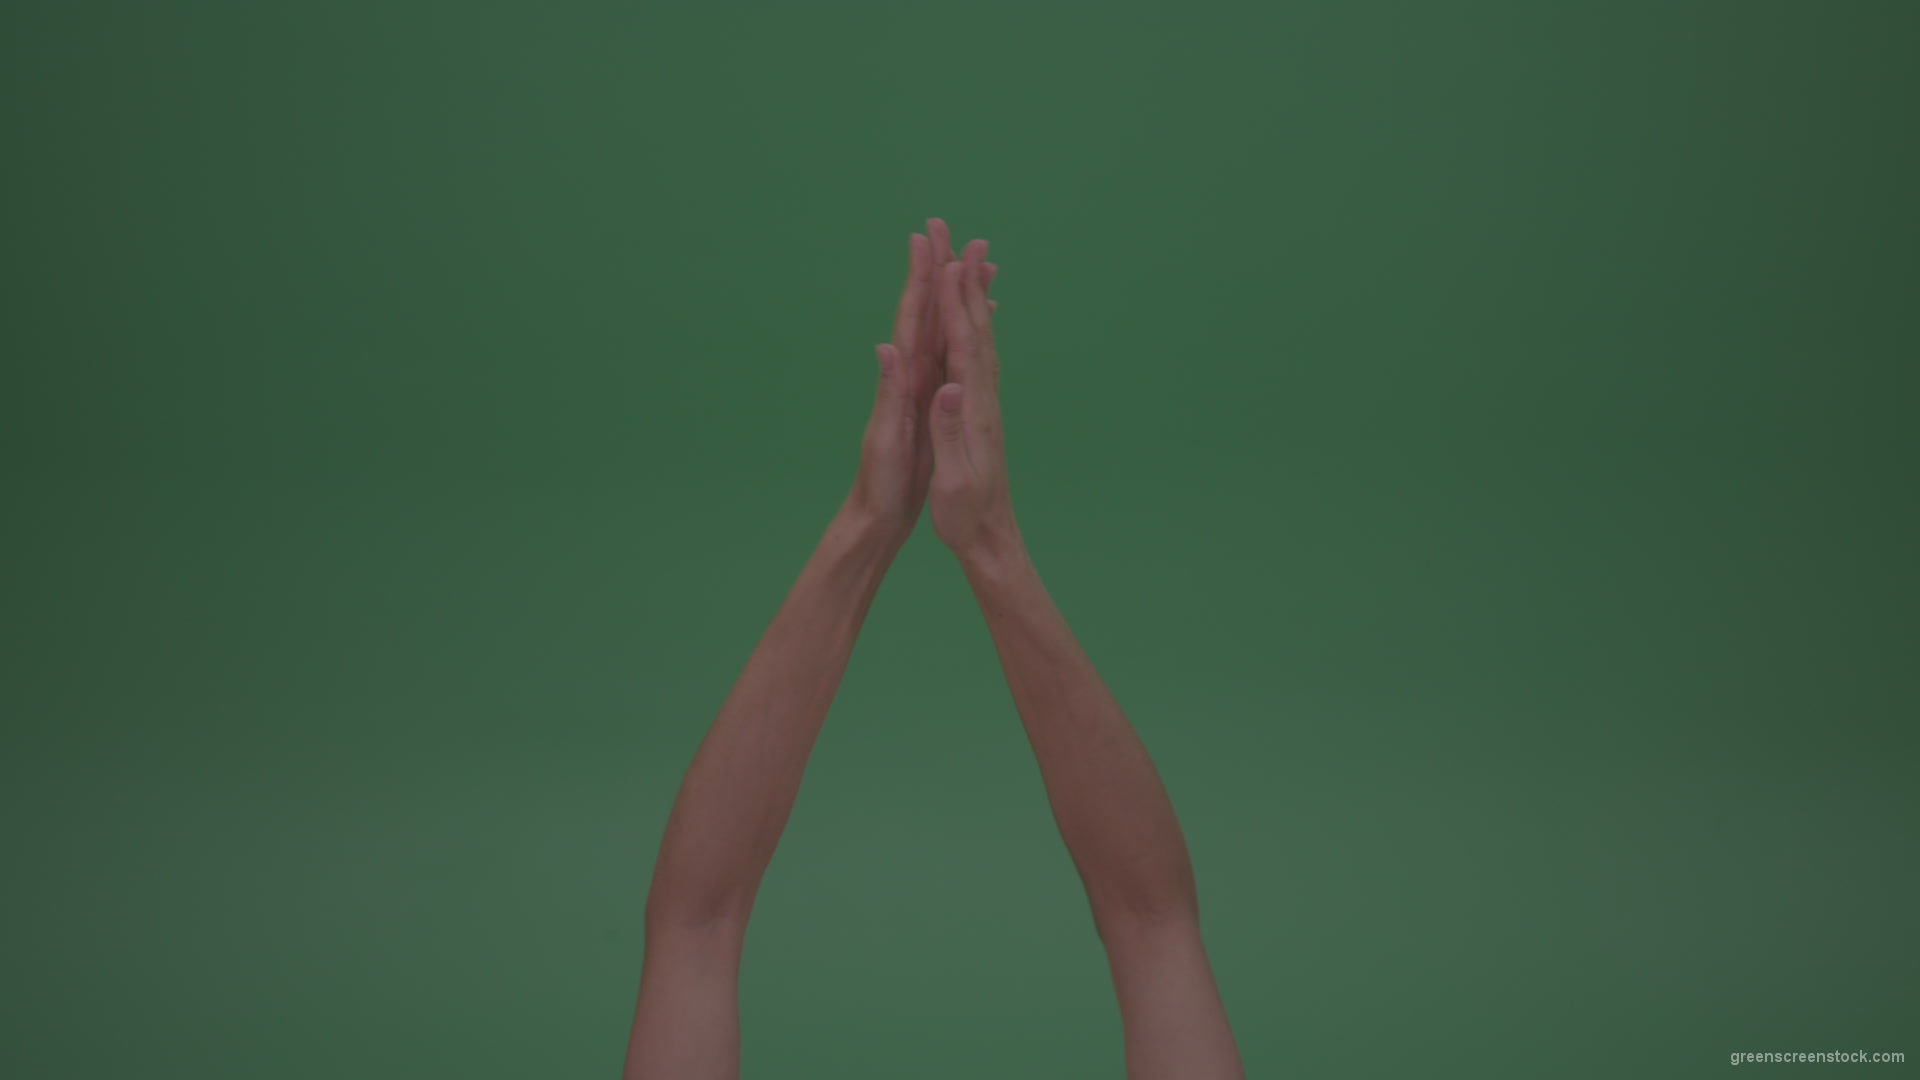 vj video background Rapidly-Clapping-Young-FemaleHands-Ovation-GreenScreenWall-ChromaKey-Background_003